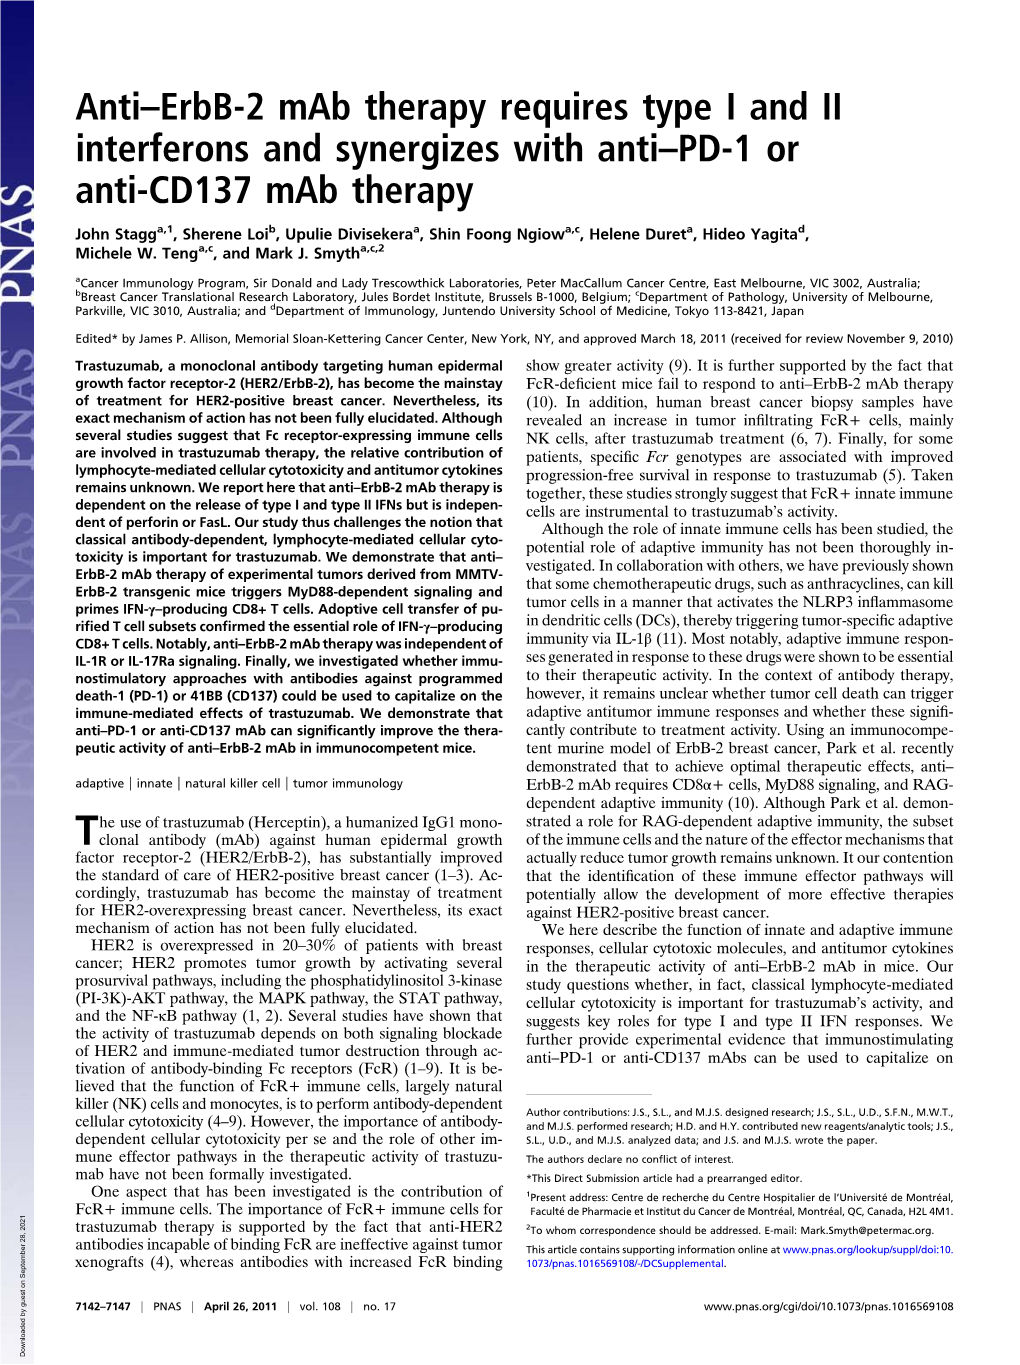 Anti–Erbb-2 Mab Therapy Requires Type I and II Interferons and Synergizes with Anti–PD-1 Or Anti-CD137 Mab Therapy